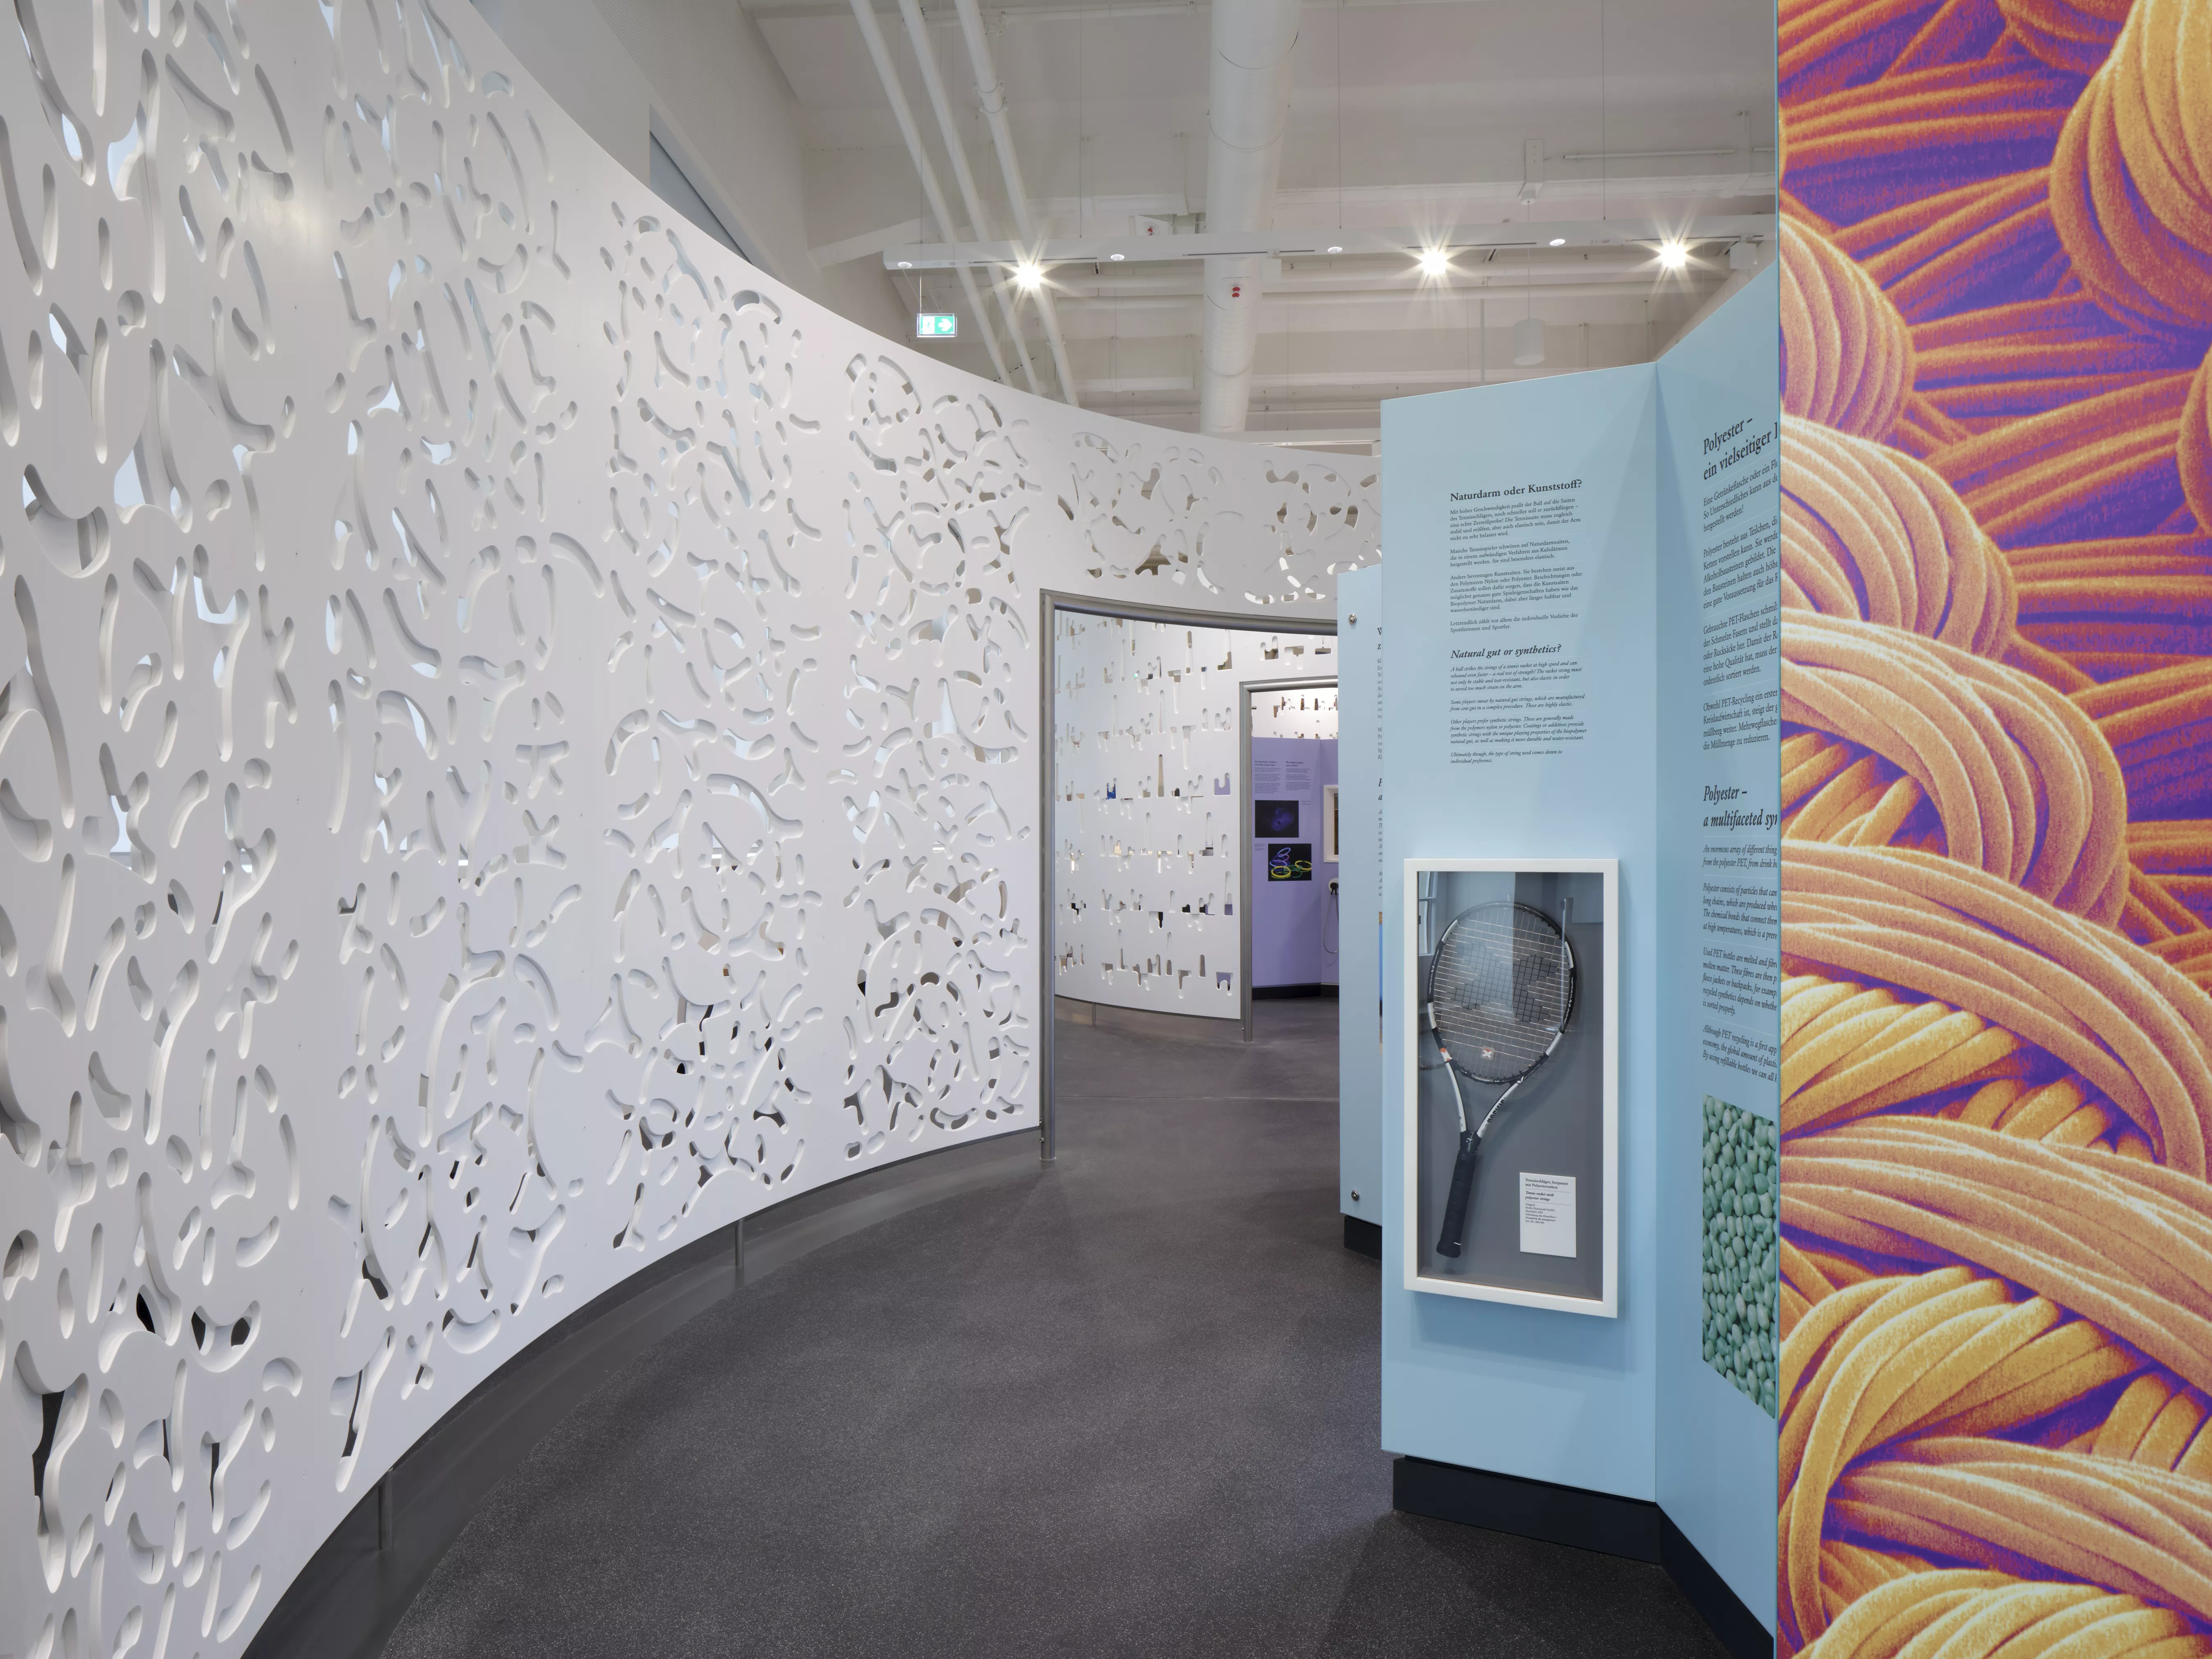 New exhibition at the Deutsches Museum uses high-tech HIMACS walls